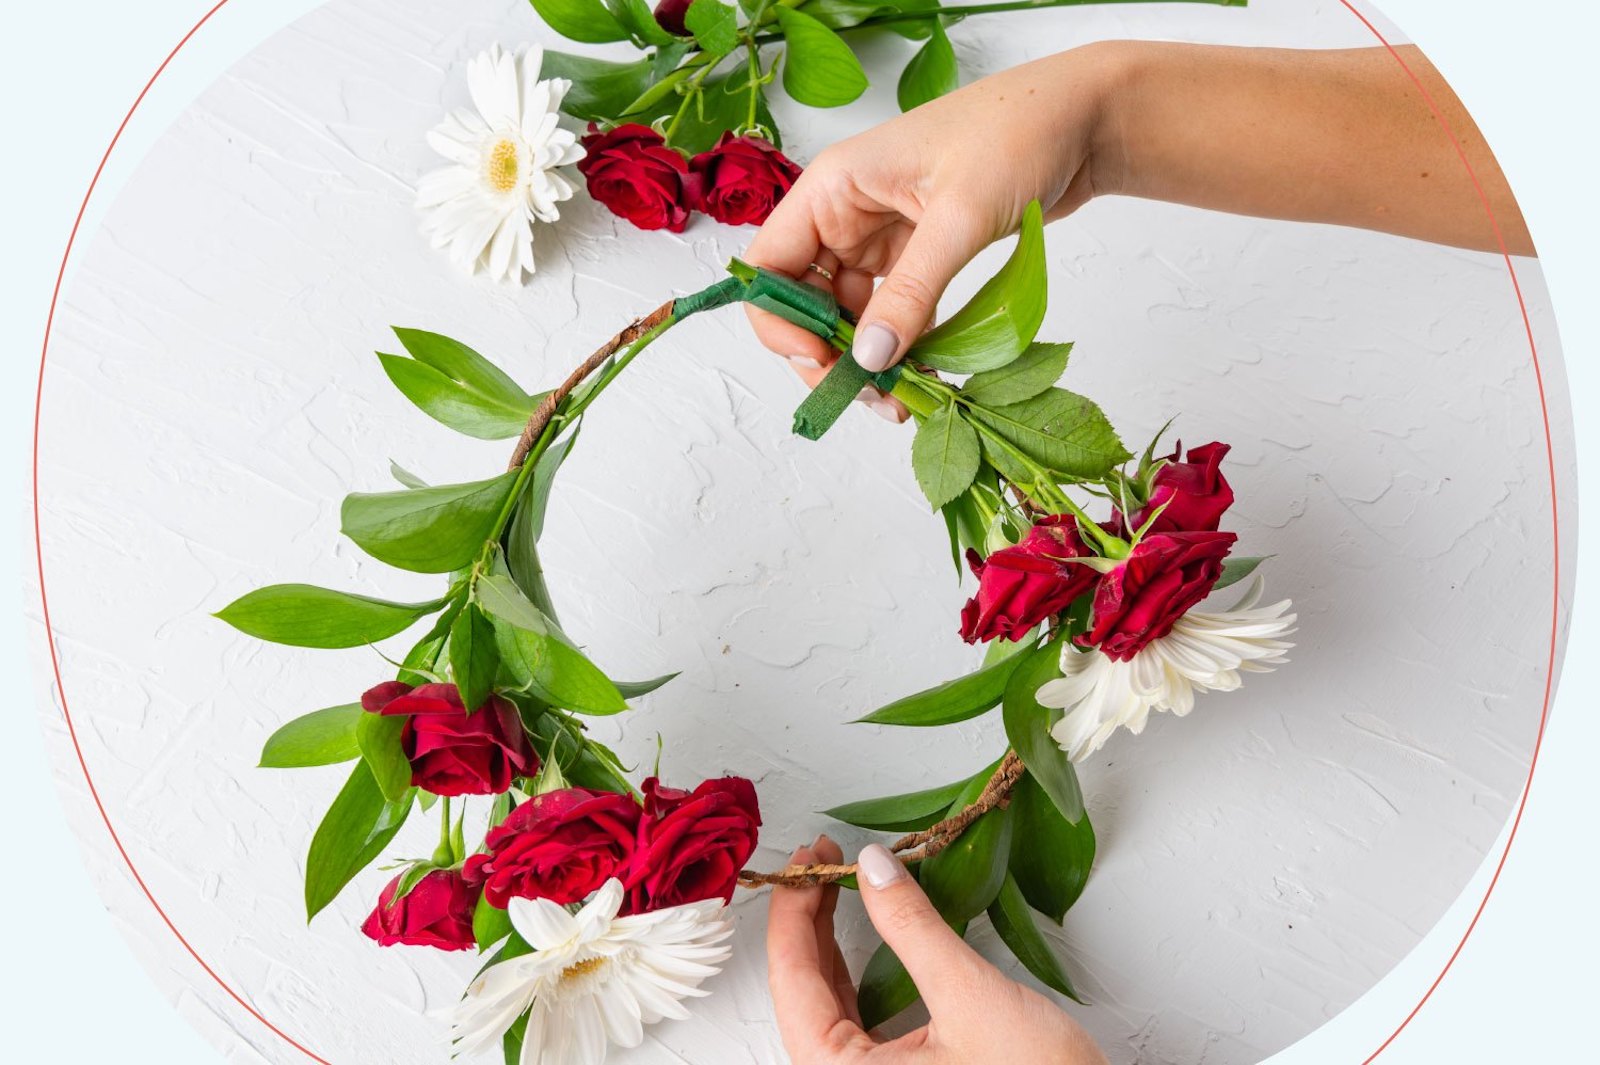 how to make a flower crown with real flowers